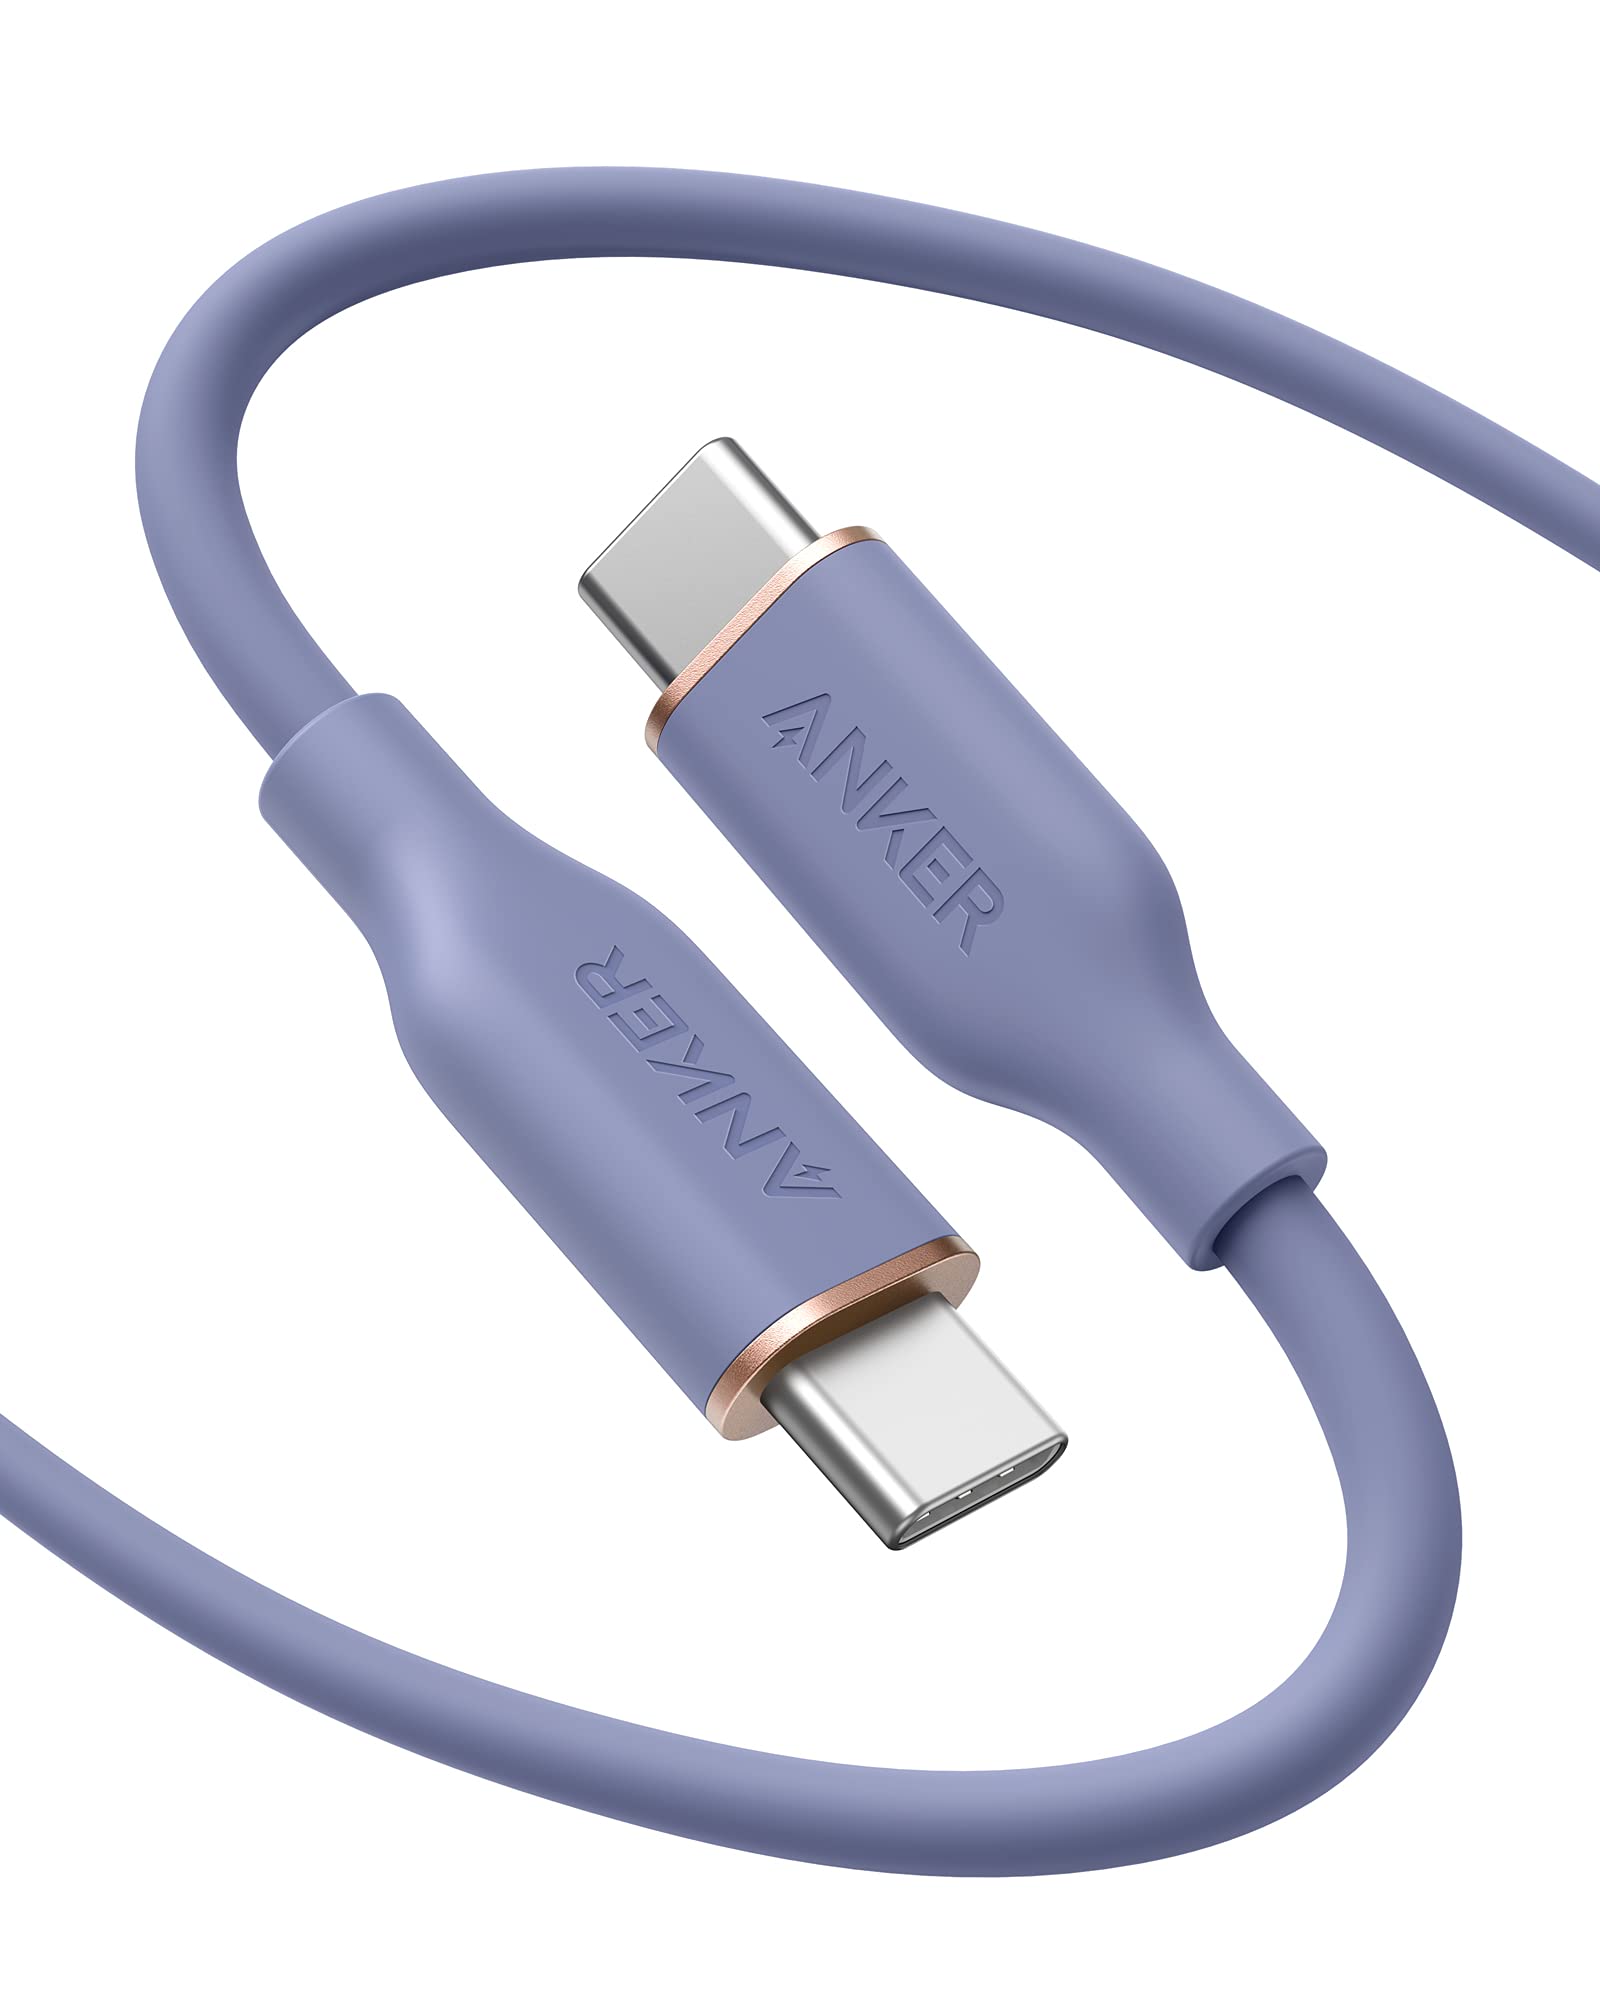 Anker 643 USB-C to USB-C Cable (Flow, Silicone) - Anker US